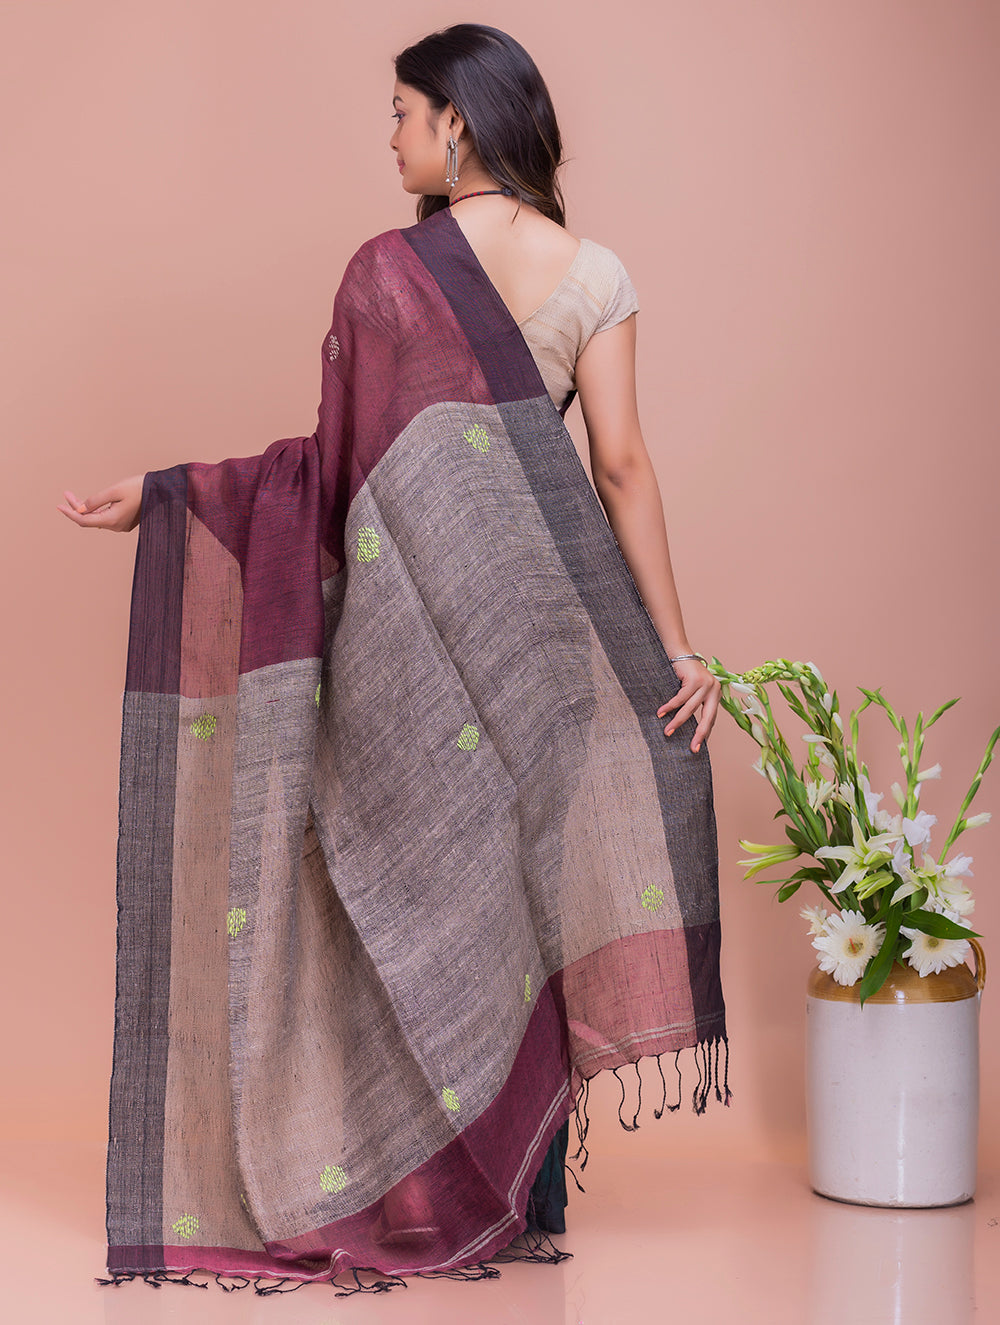 Load image into Gallery viewer, Soft Bengal Handwoven Linen Saree - Teal &amp; Pink